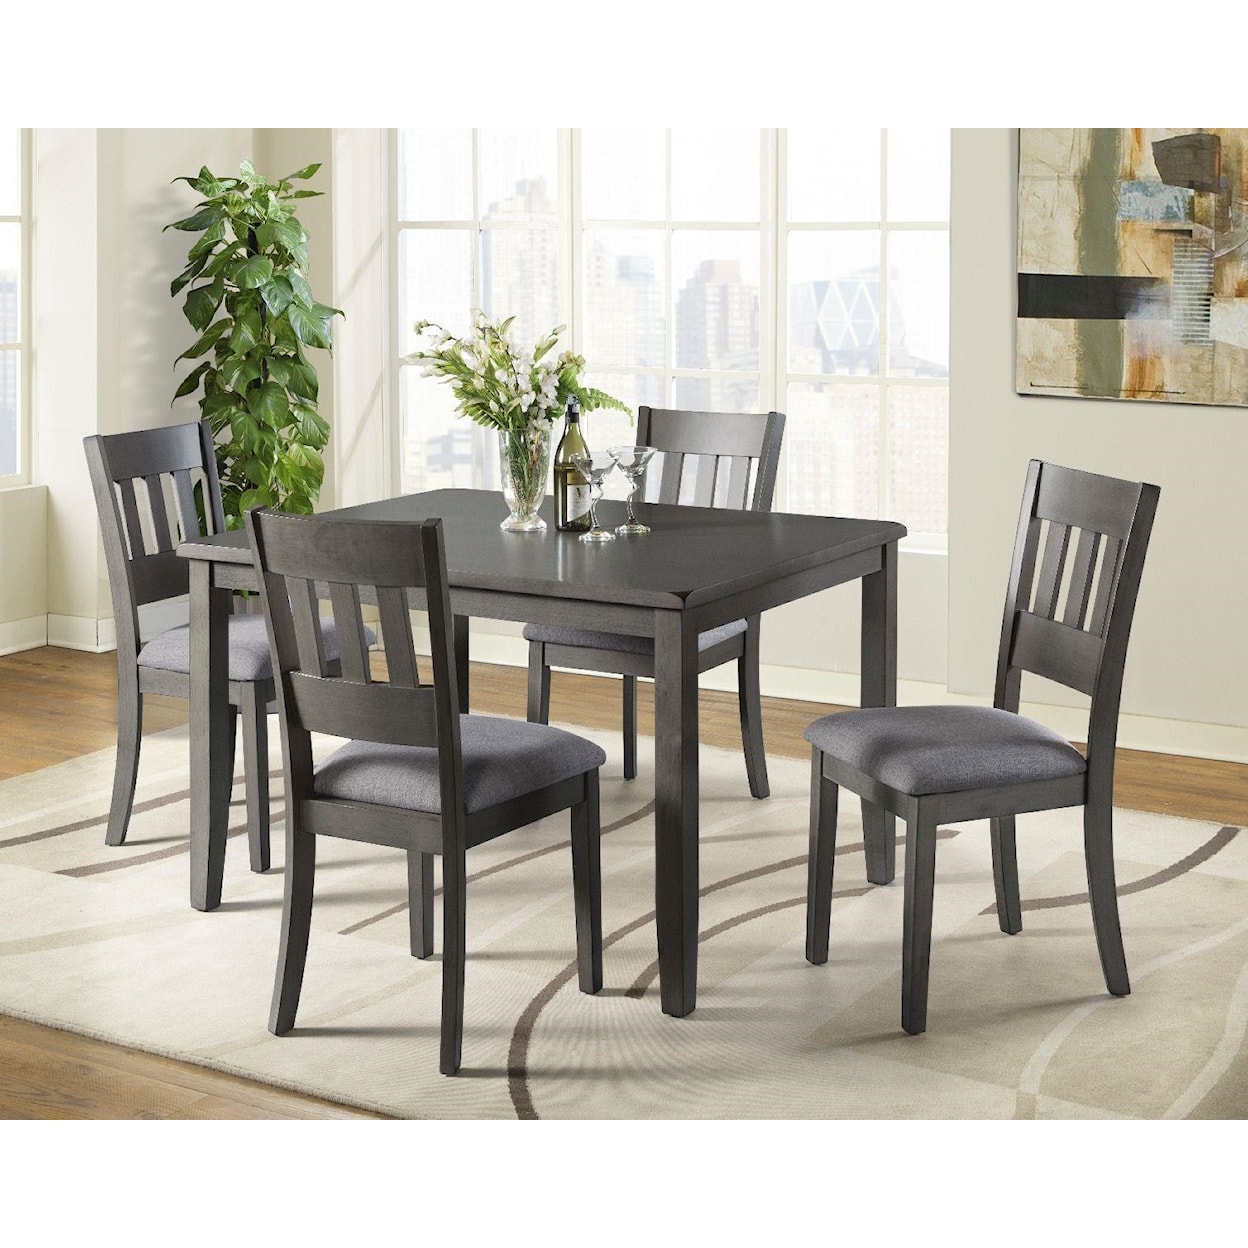 Vilo Home Paros Dining Table and 4 Side Chair Set